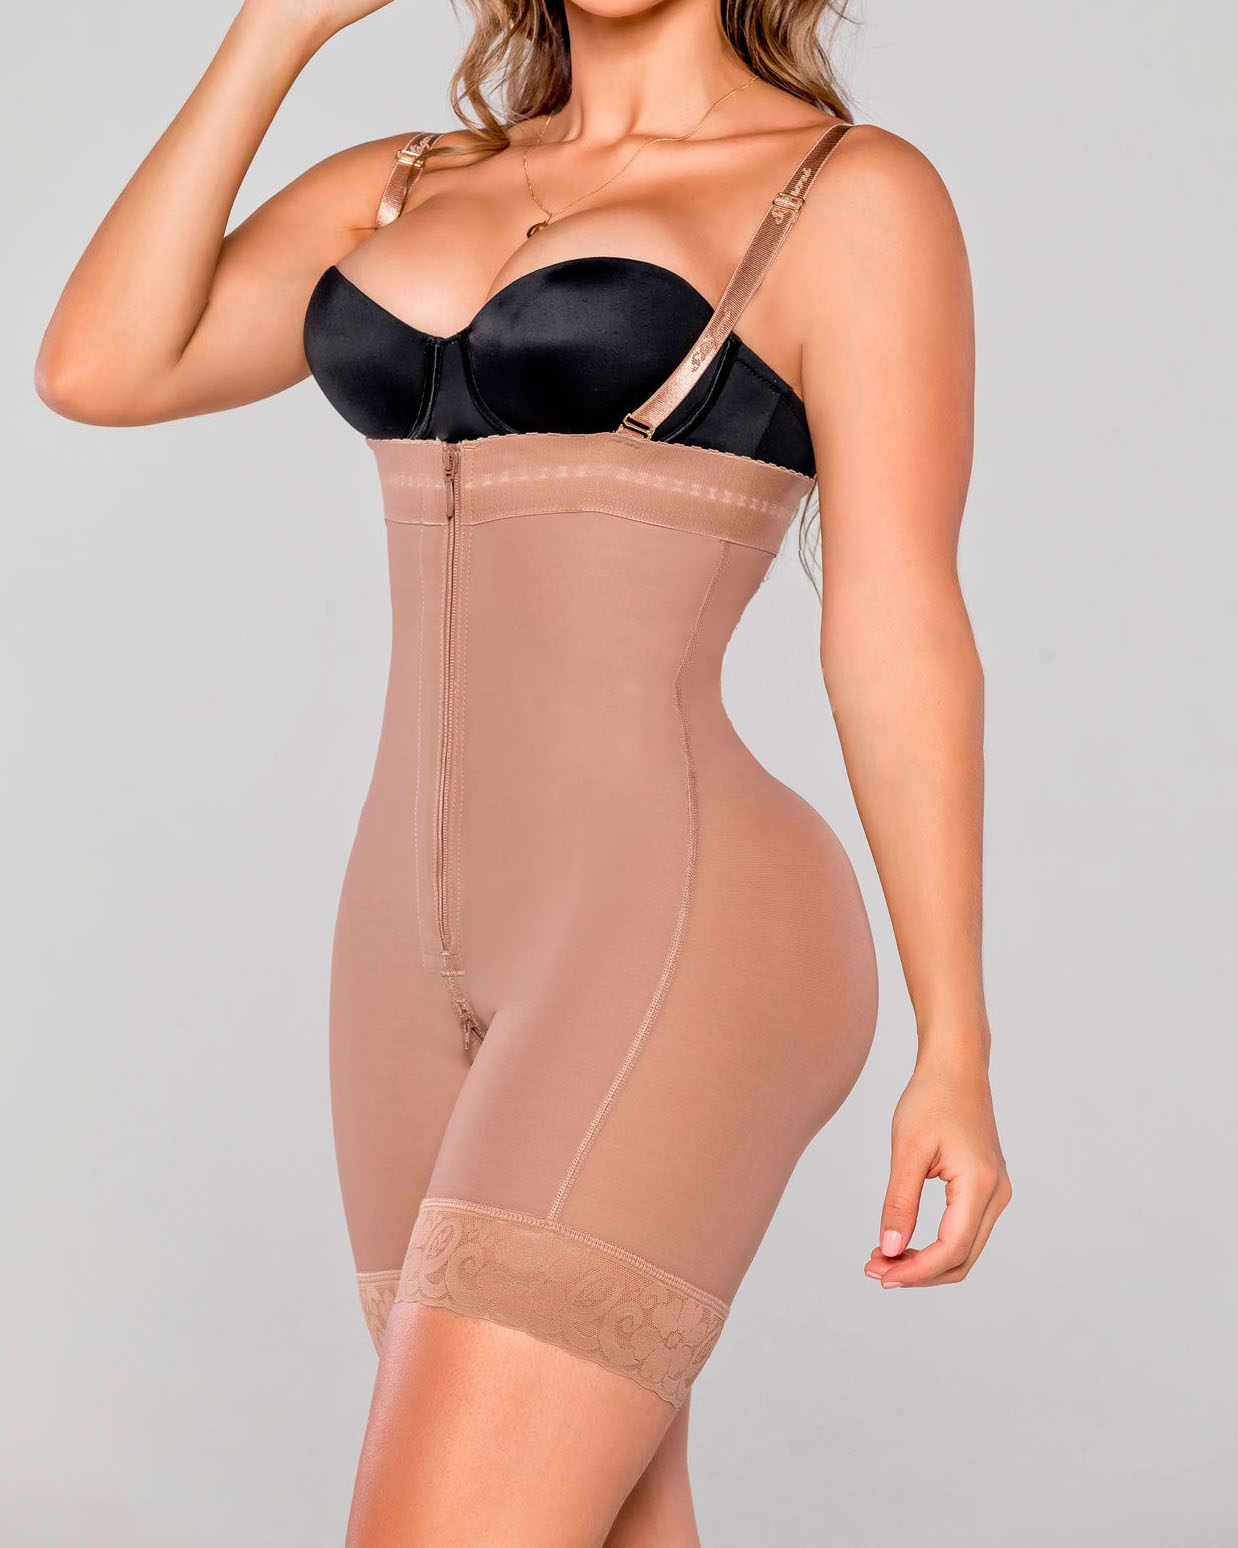 ChicCurve Best Shapewear for Women – ChicCurve